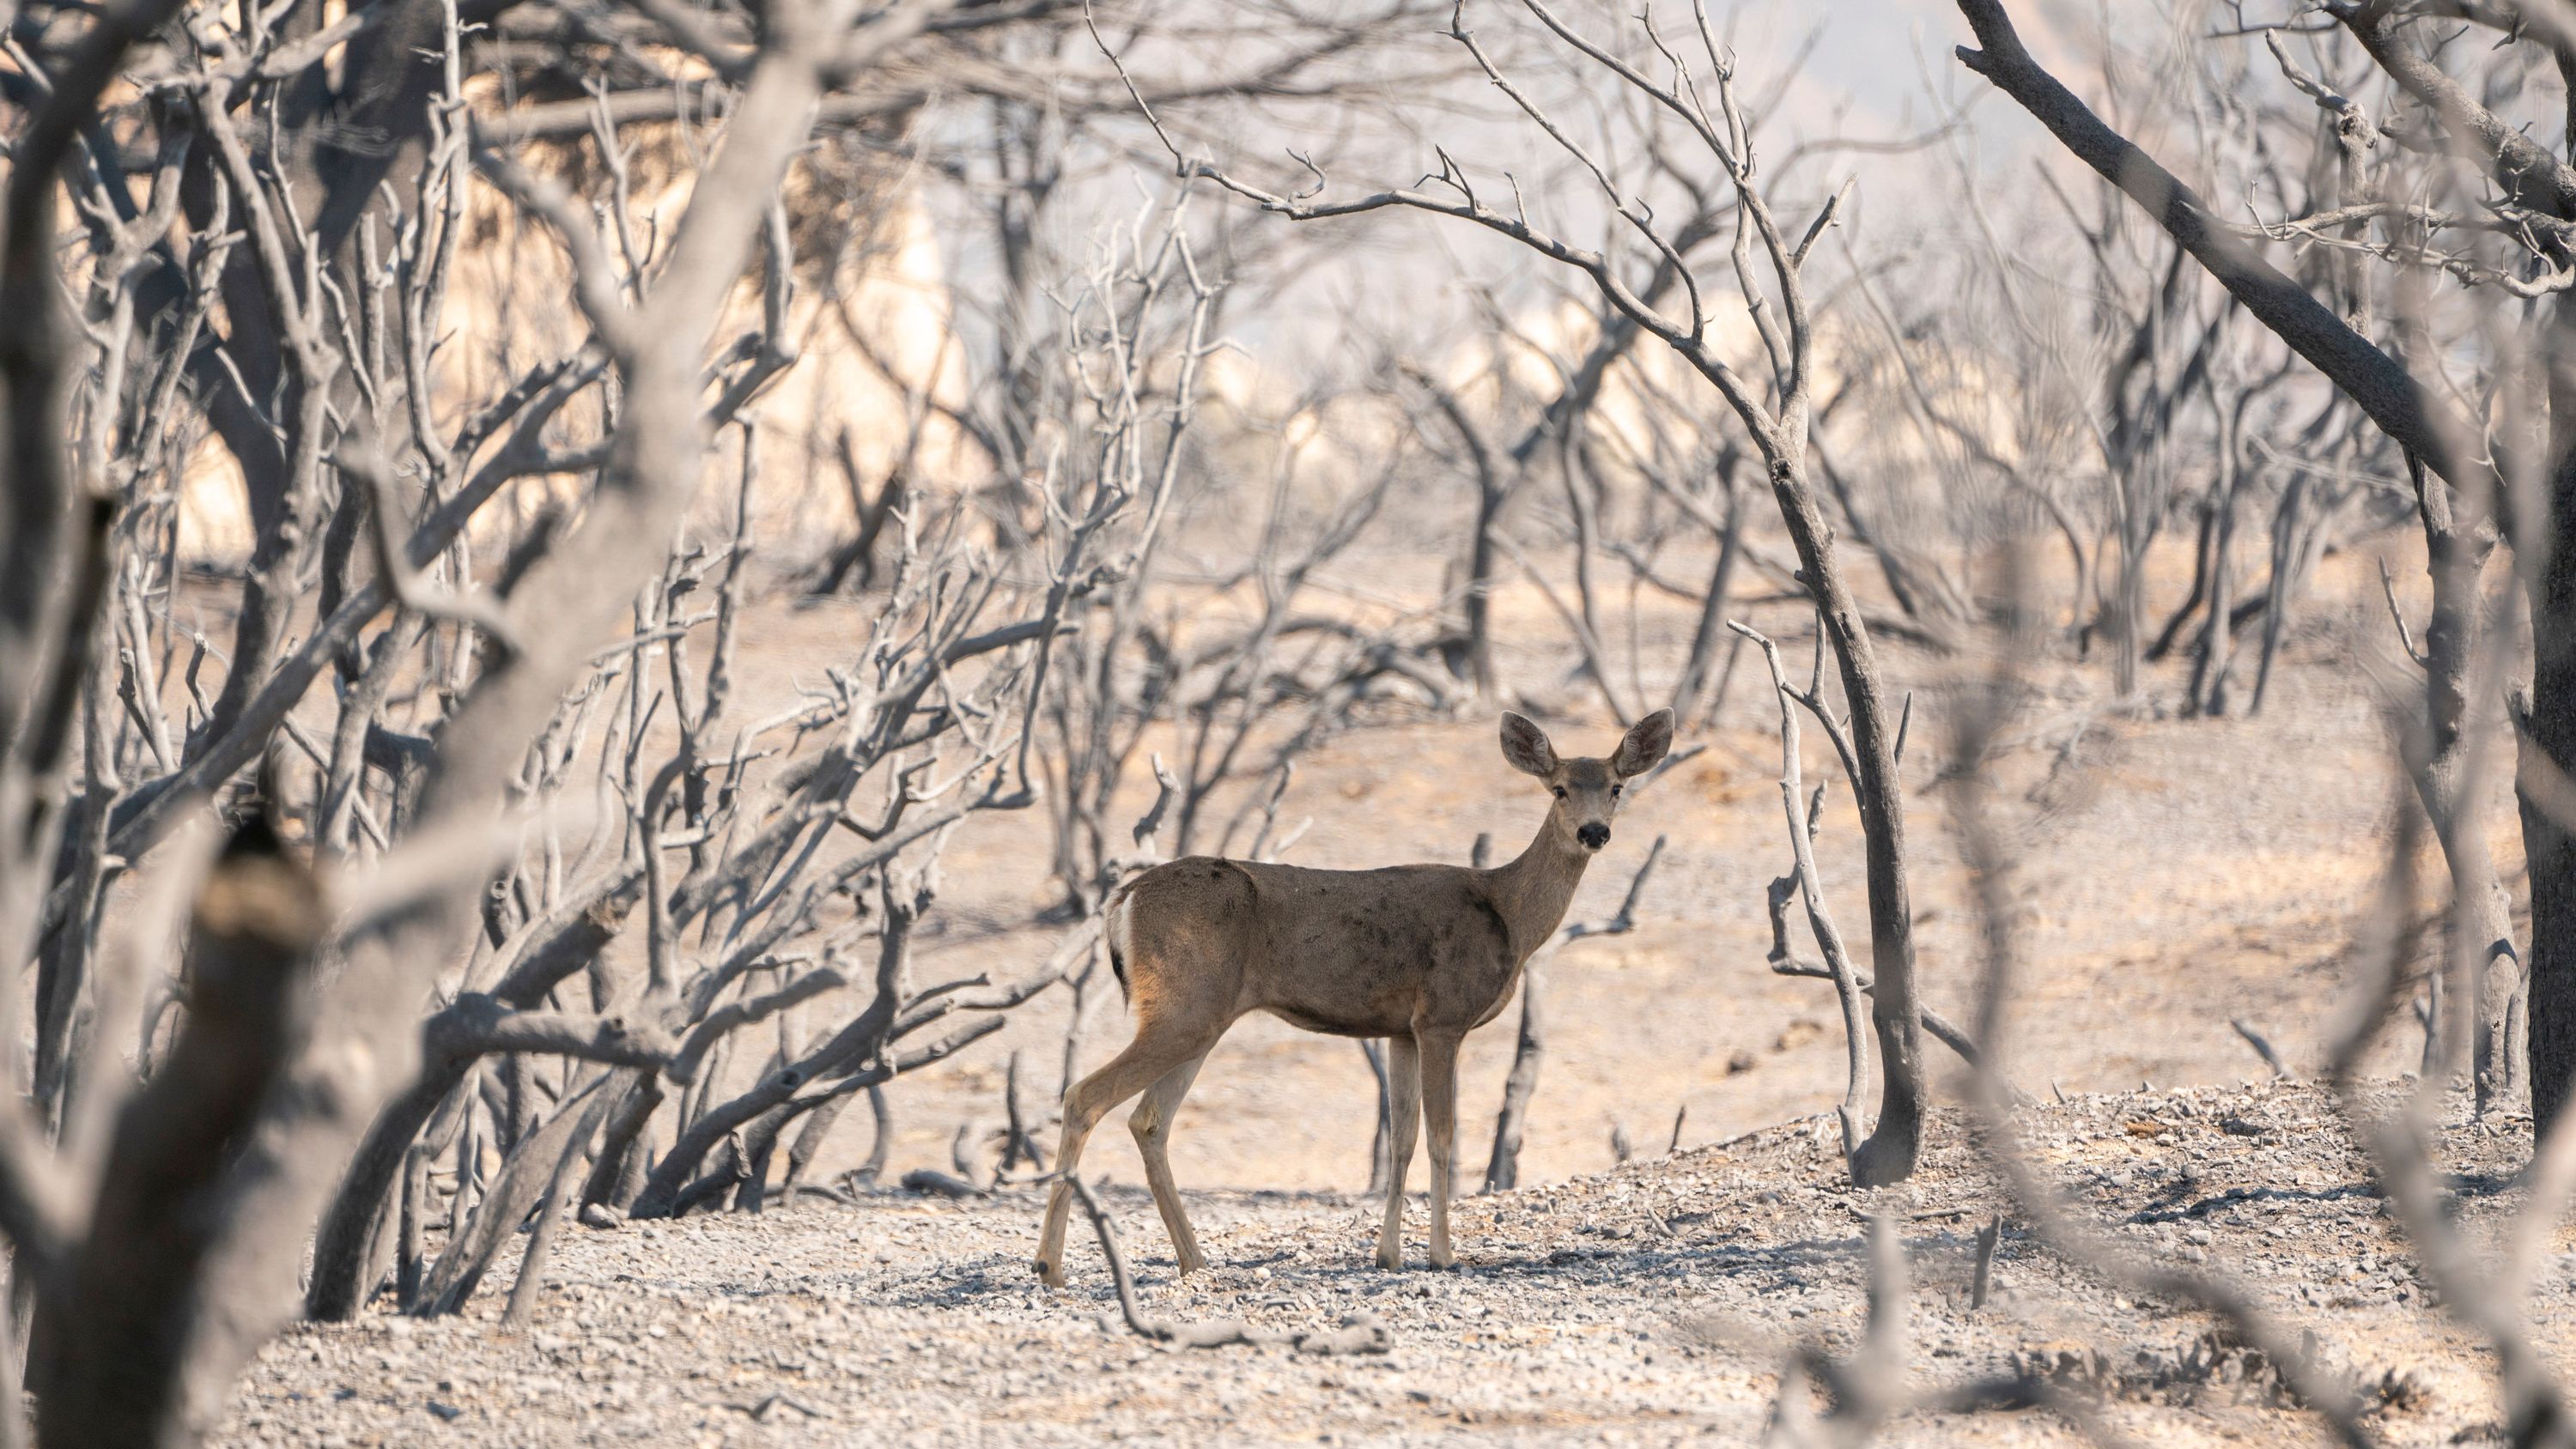 A deer looks for food in an area burned by the Bobcat Fire in Pearblossom, California, on September 20, 2020.